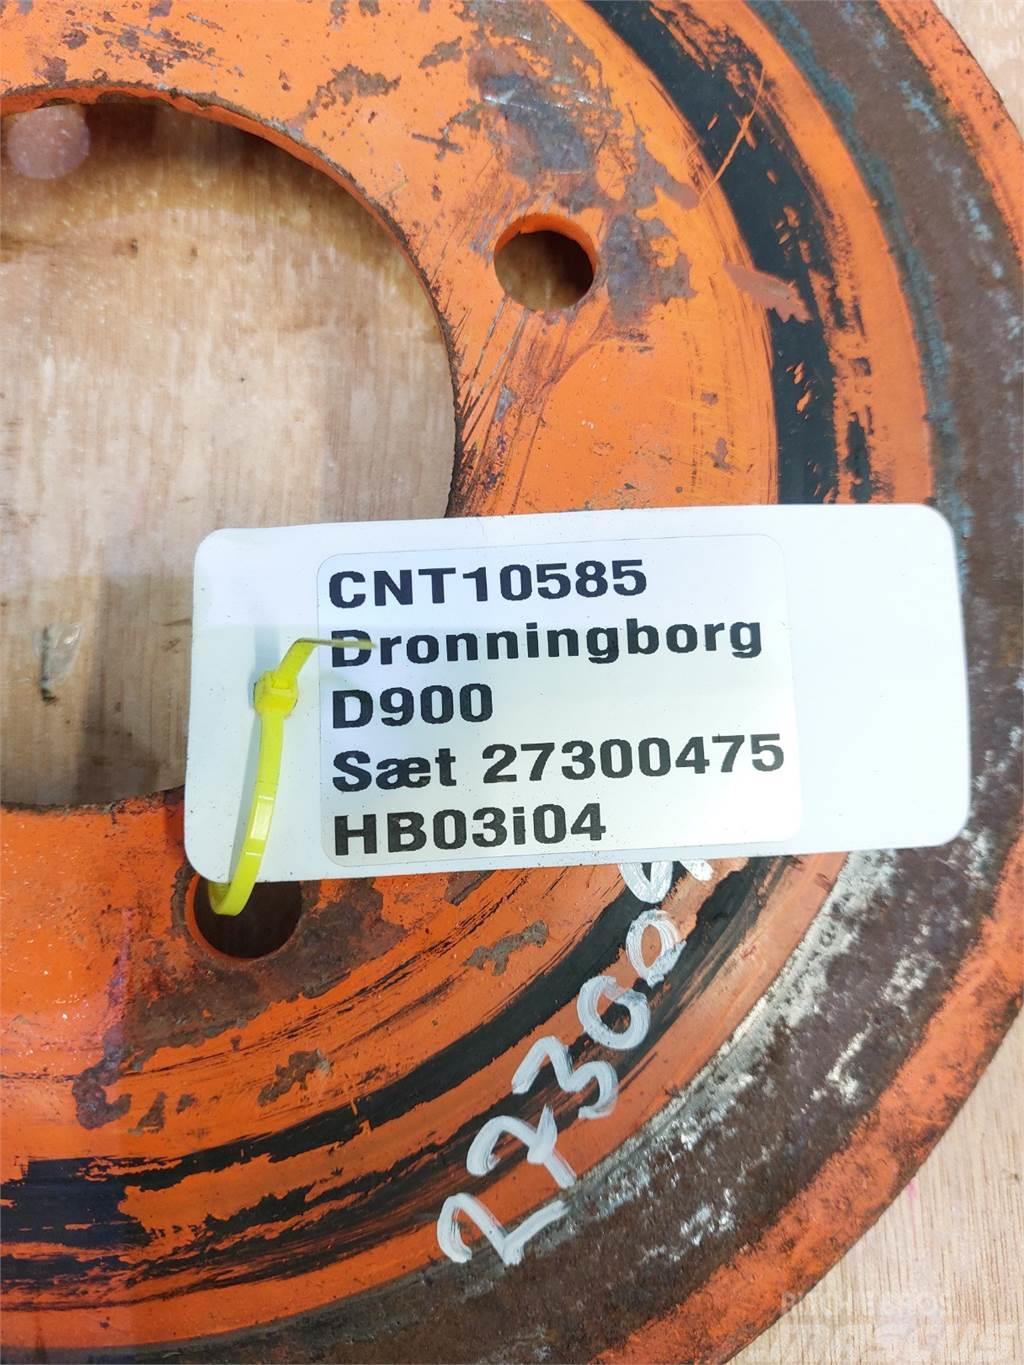 Dronningborg D900 Other farming machines